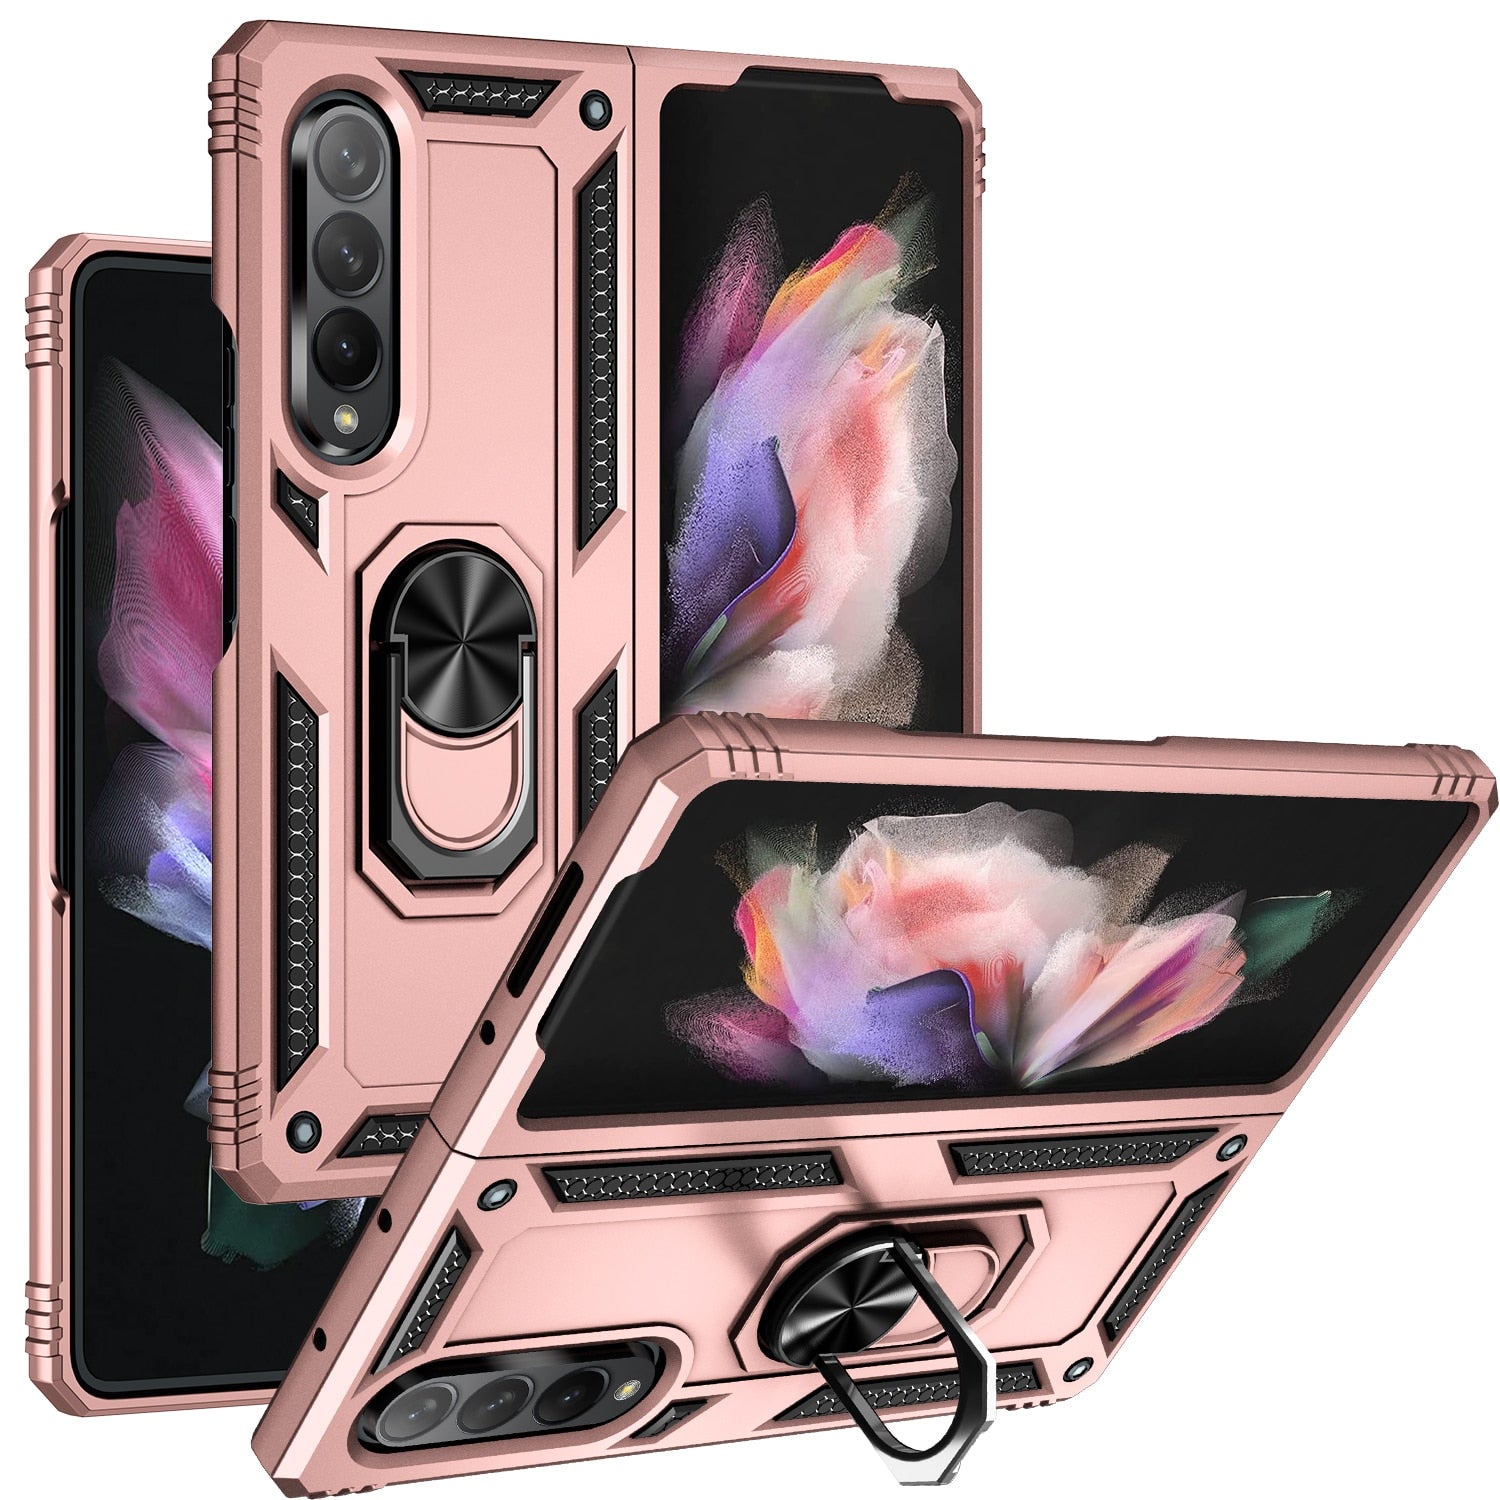 Case for Samsung Galaxy Z Fold 4 Fold 3, with Finger Ring Holder Kickstand, Military Grade Stand Cover Phone Cases for Z Fold4 - 0 Z Fold 3 / Pink / United States Find Epic Store